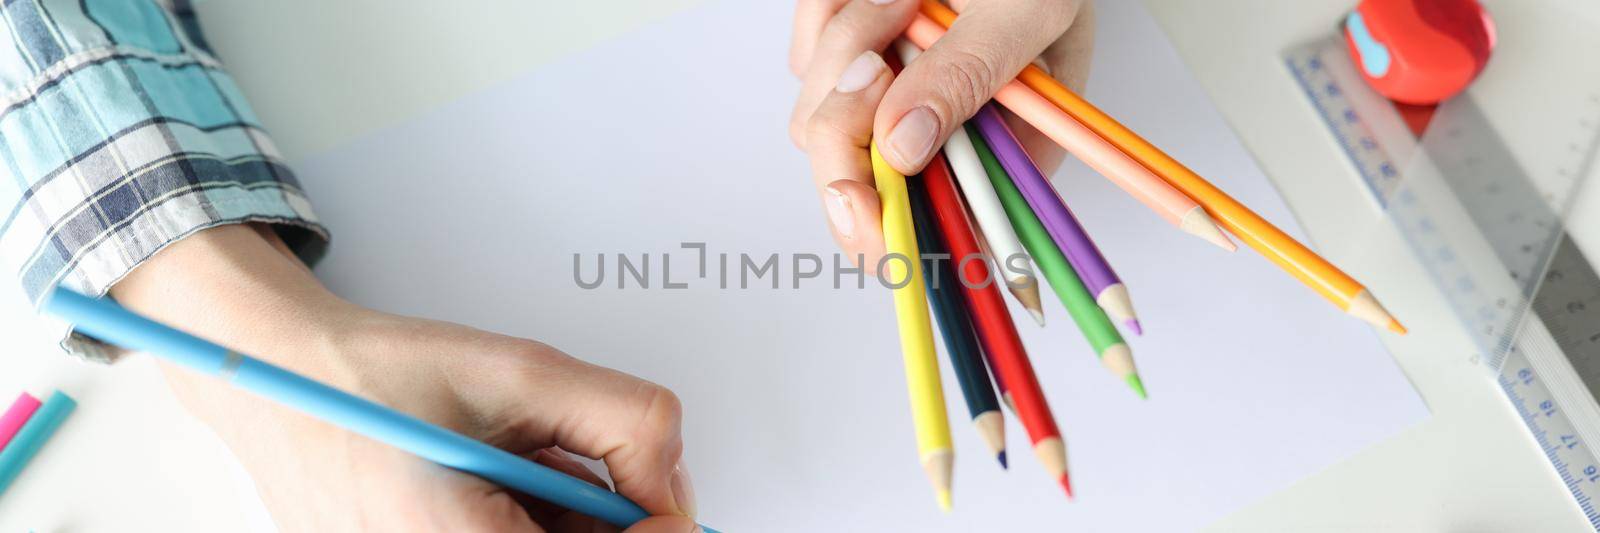 Woman designer drawing with multicolored pencils on paper closeup. Fine art lessons concept